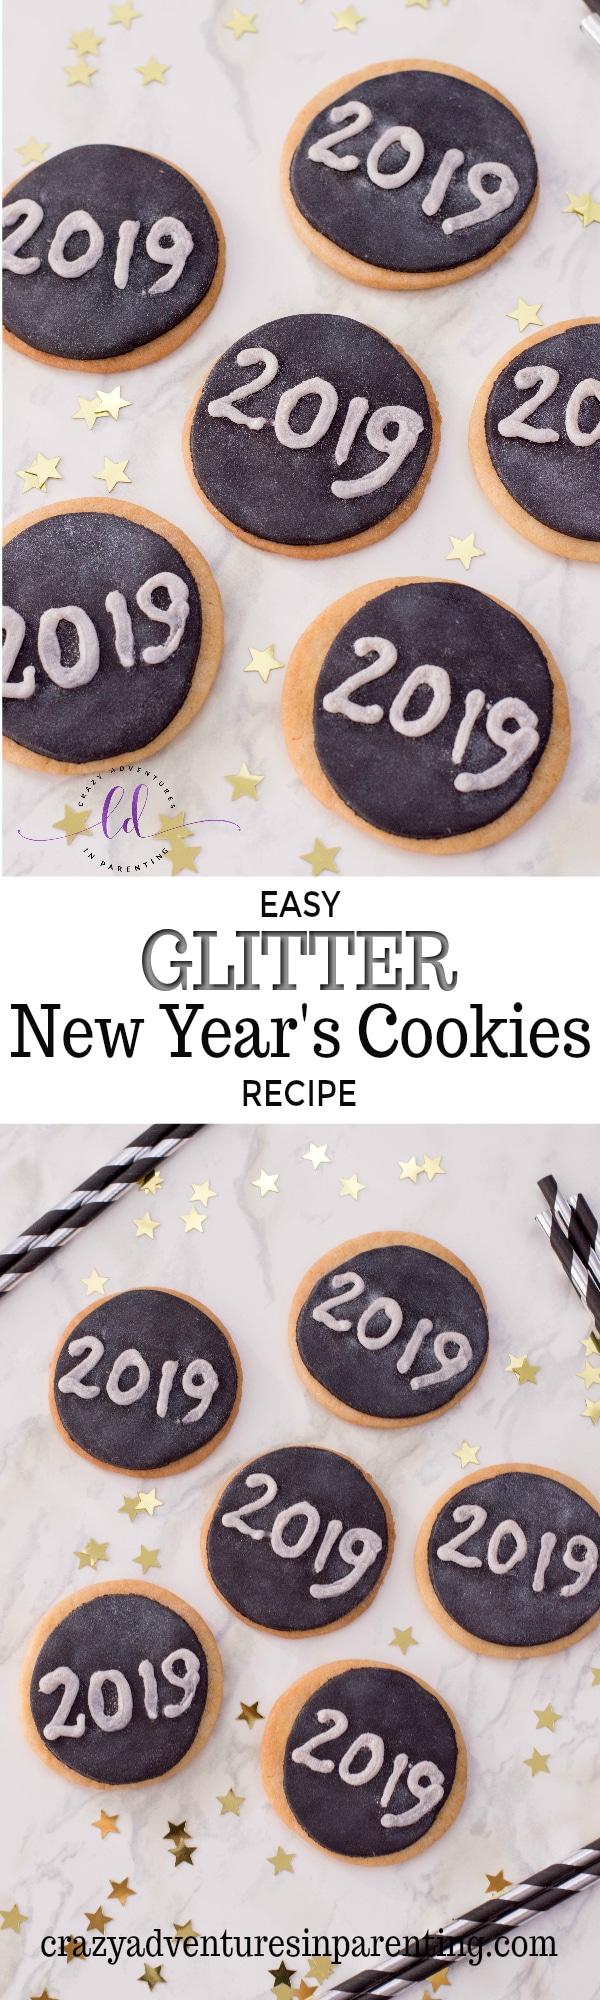 Easy Glitter New Year's Cookies Recipe